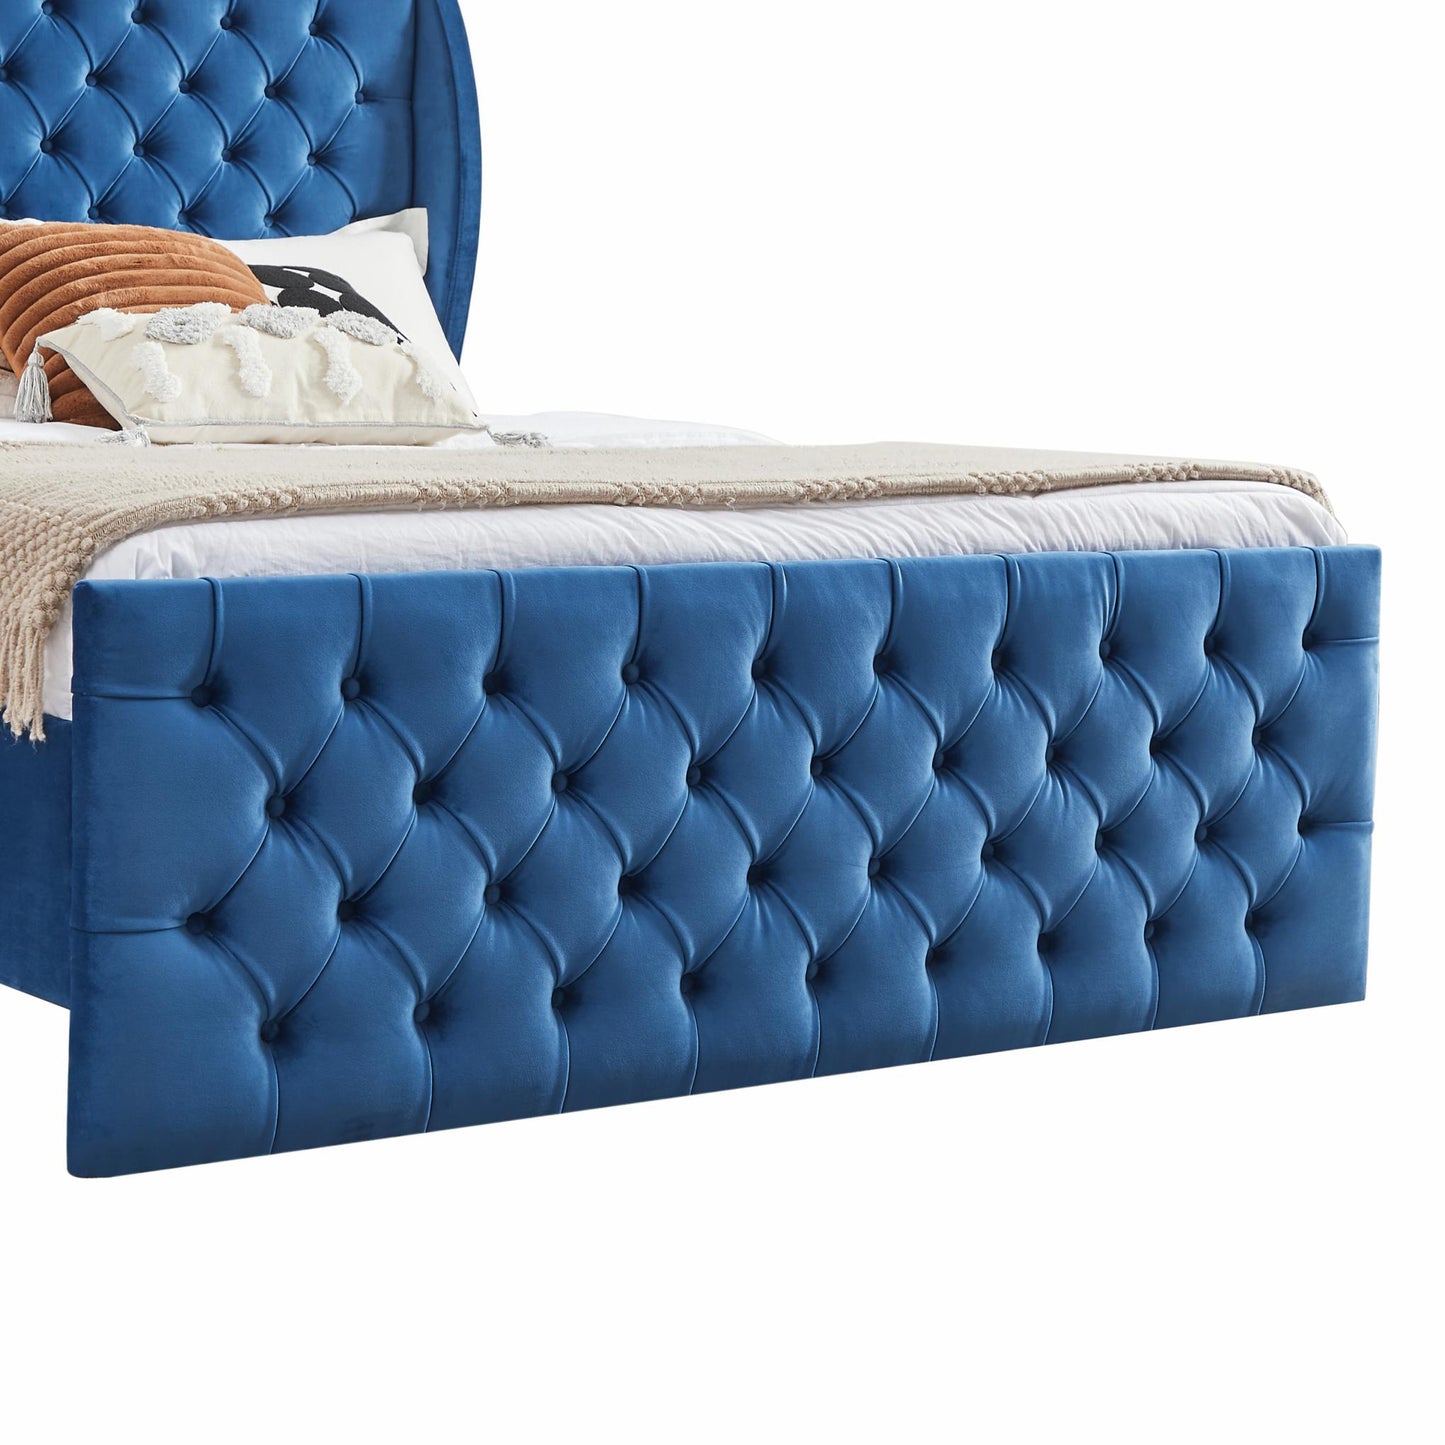 LuxeDream Chesterfield King Size Bed